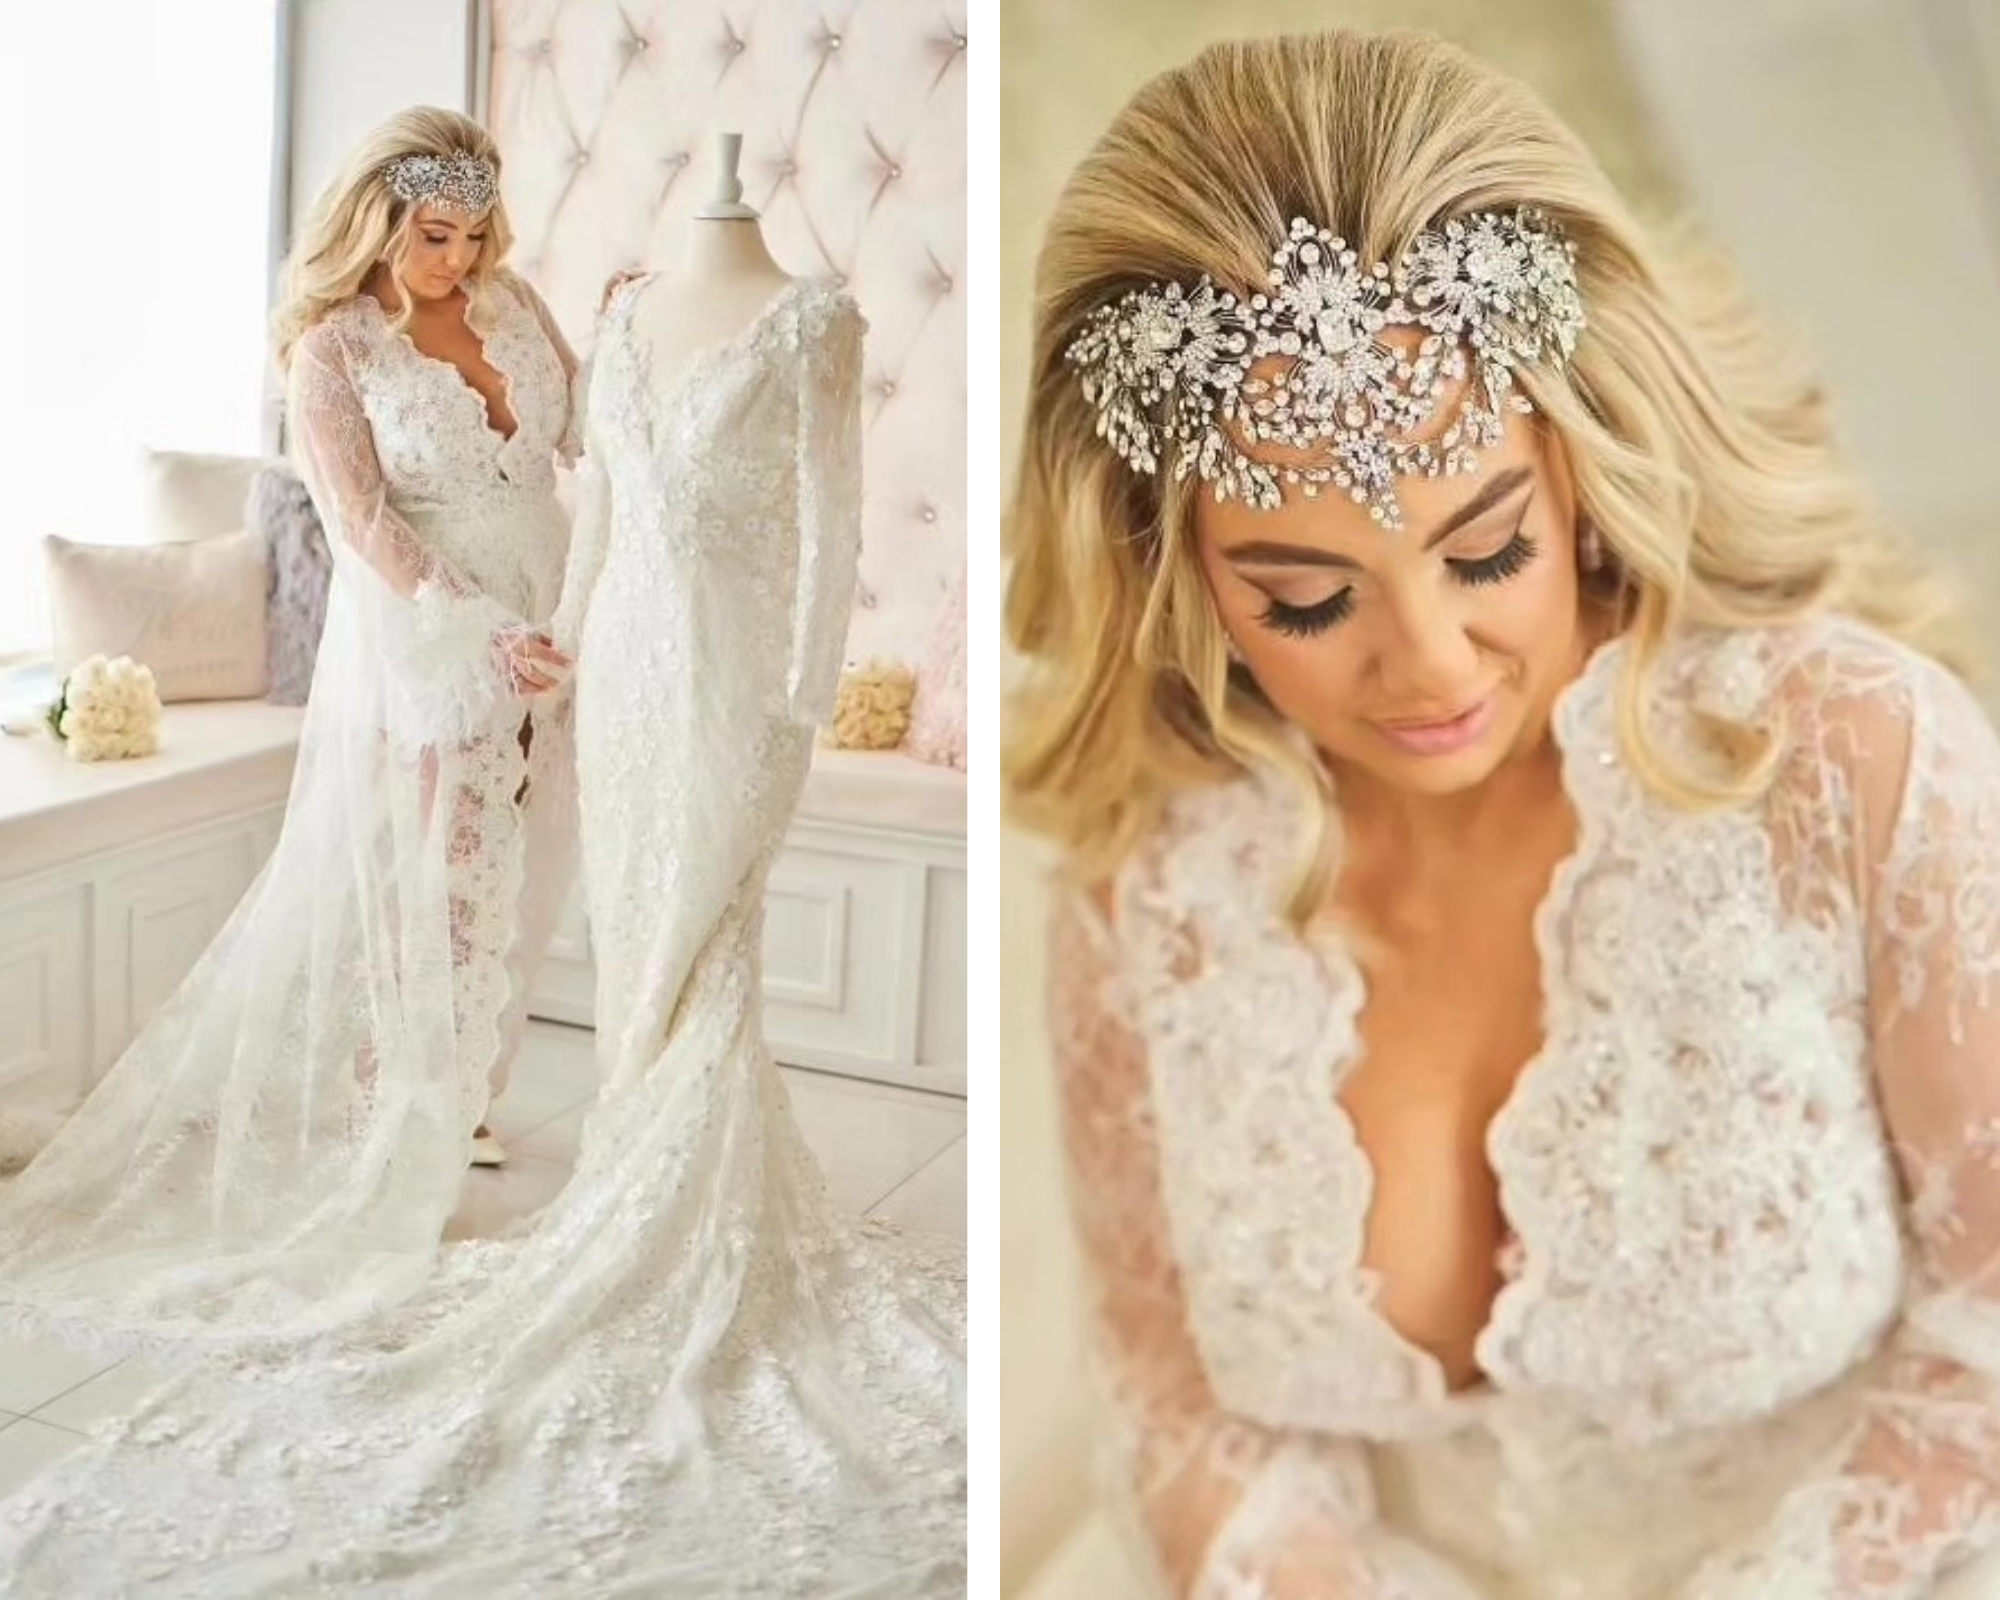 A beautiful blond bride wearing a lace robe and crystal bridal headpiece. She’s standing next to her wedding dress on a mannequin.